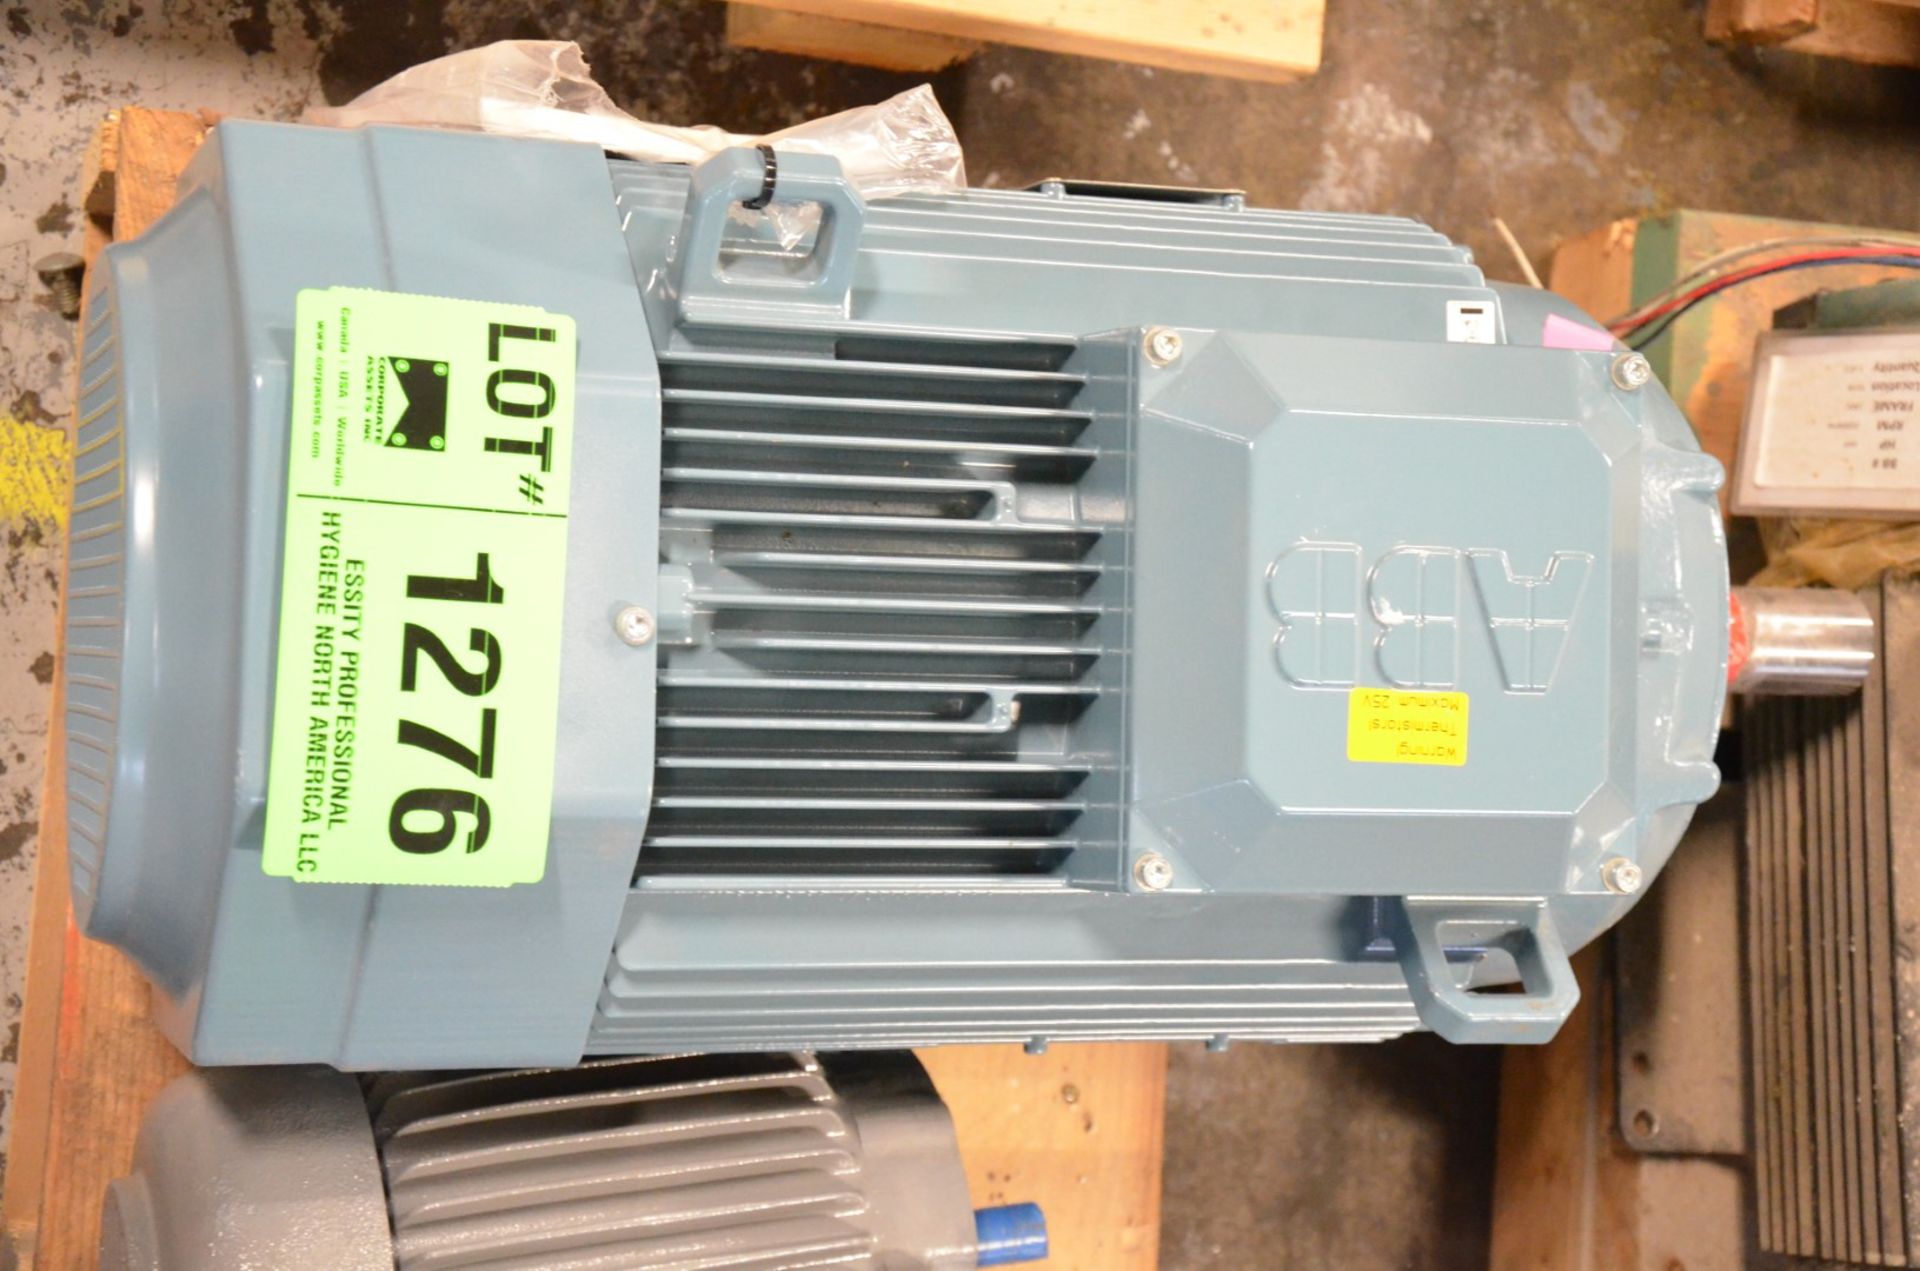 ABB 11 KW 460V 1183 RPM ELECTRIC MOTOR [RIGGING FEE FOR LOT #1276 - $25 USD PLUS APPLICABLE TAXES]